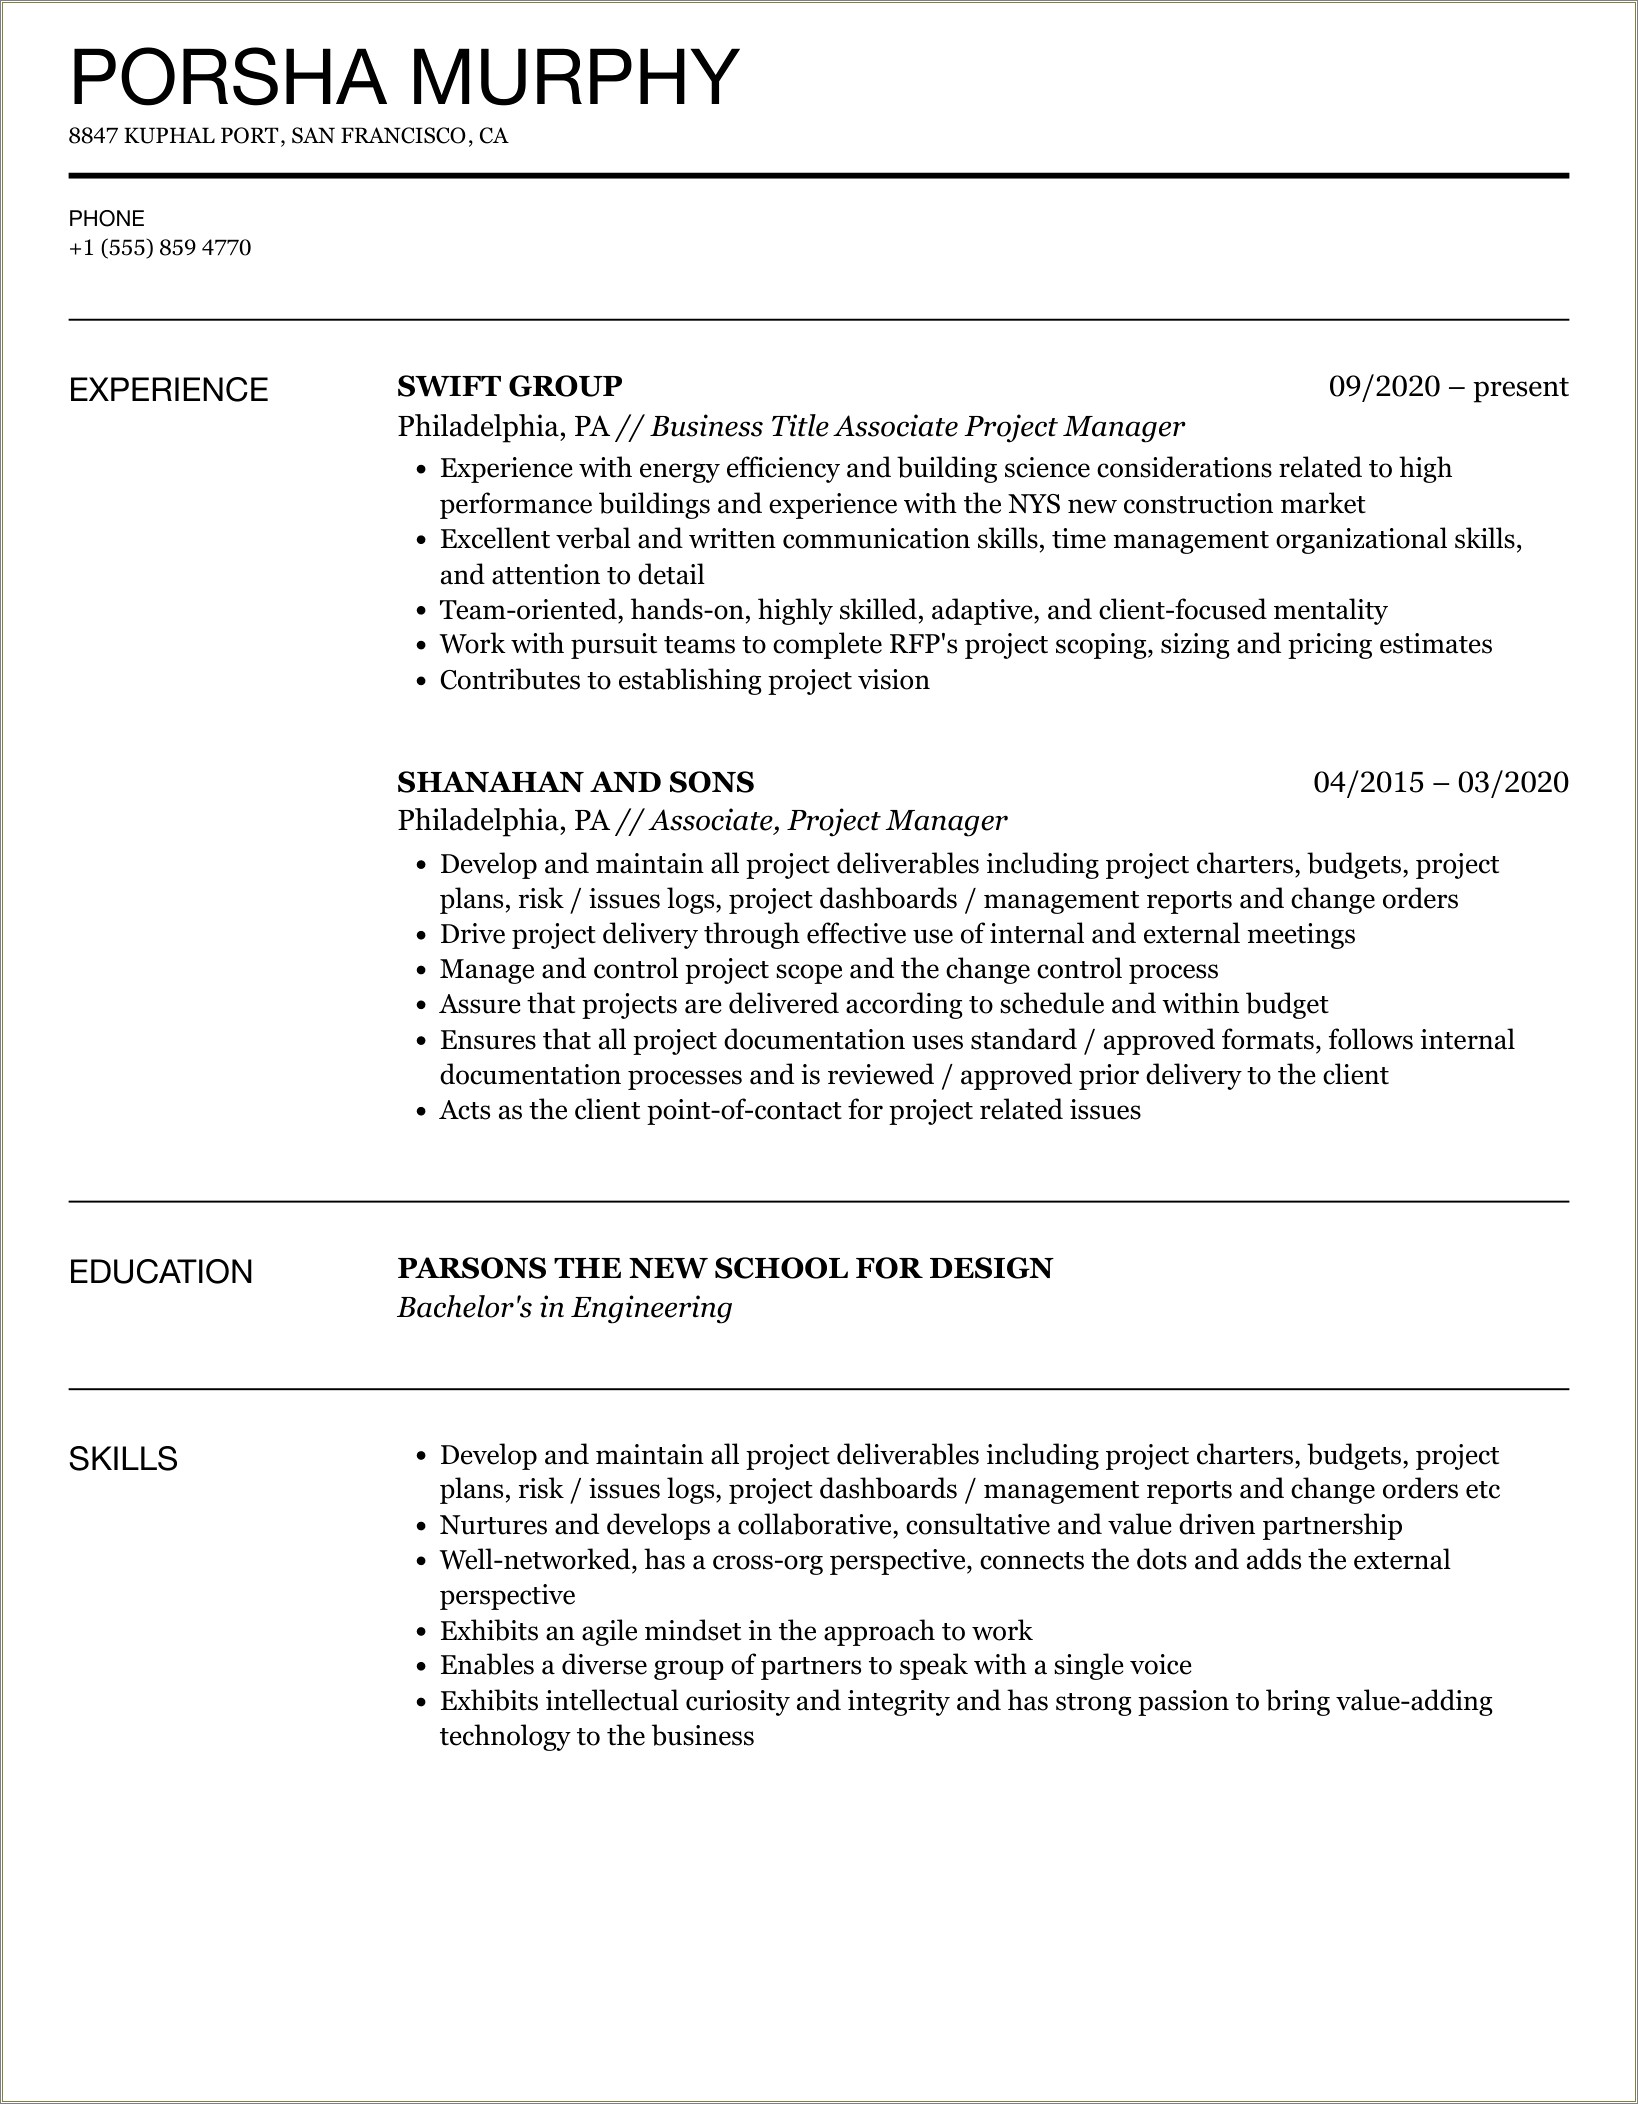 Associate Project Manager Market Research Resume Experience